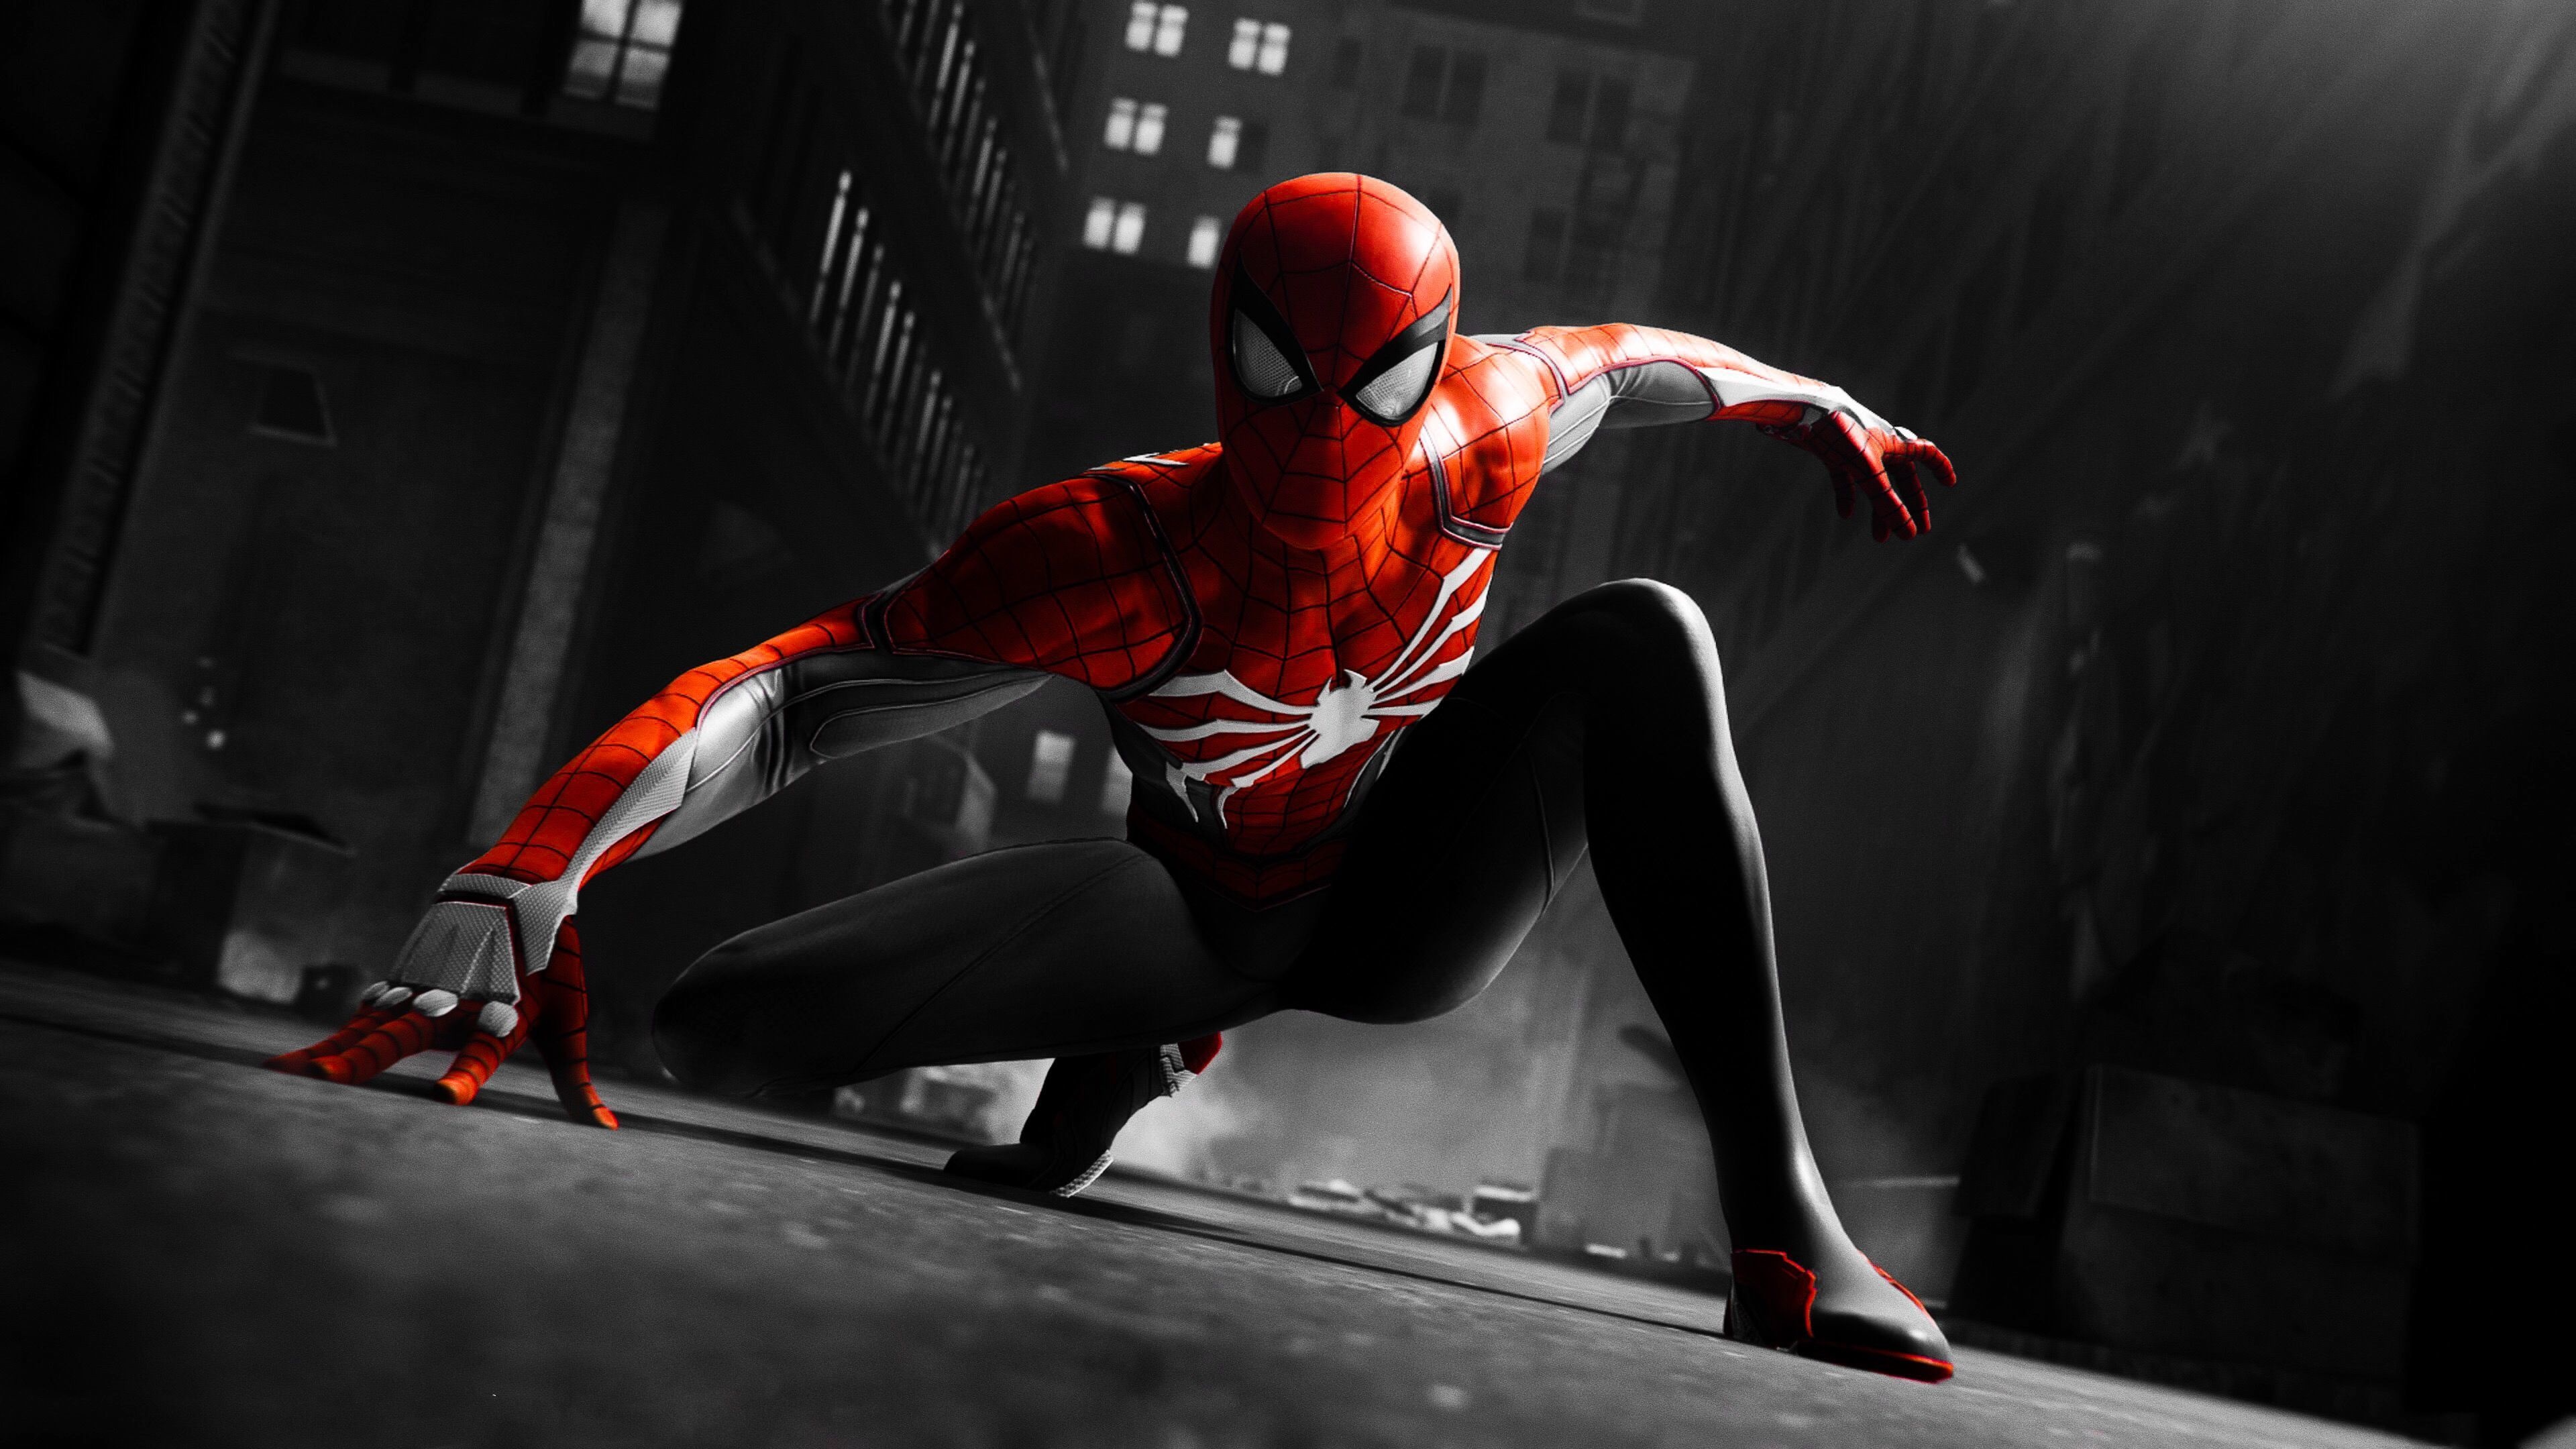 Download wallpaper 3840x2160 black and red, suit, spider-man, video